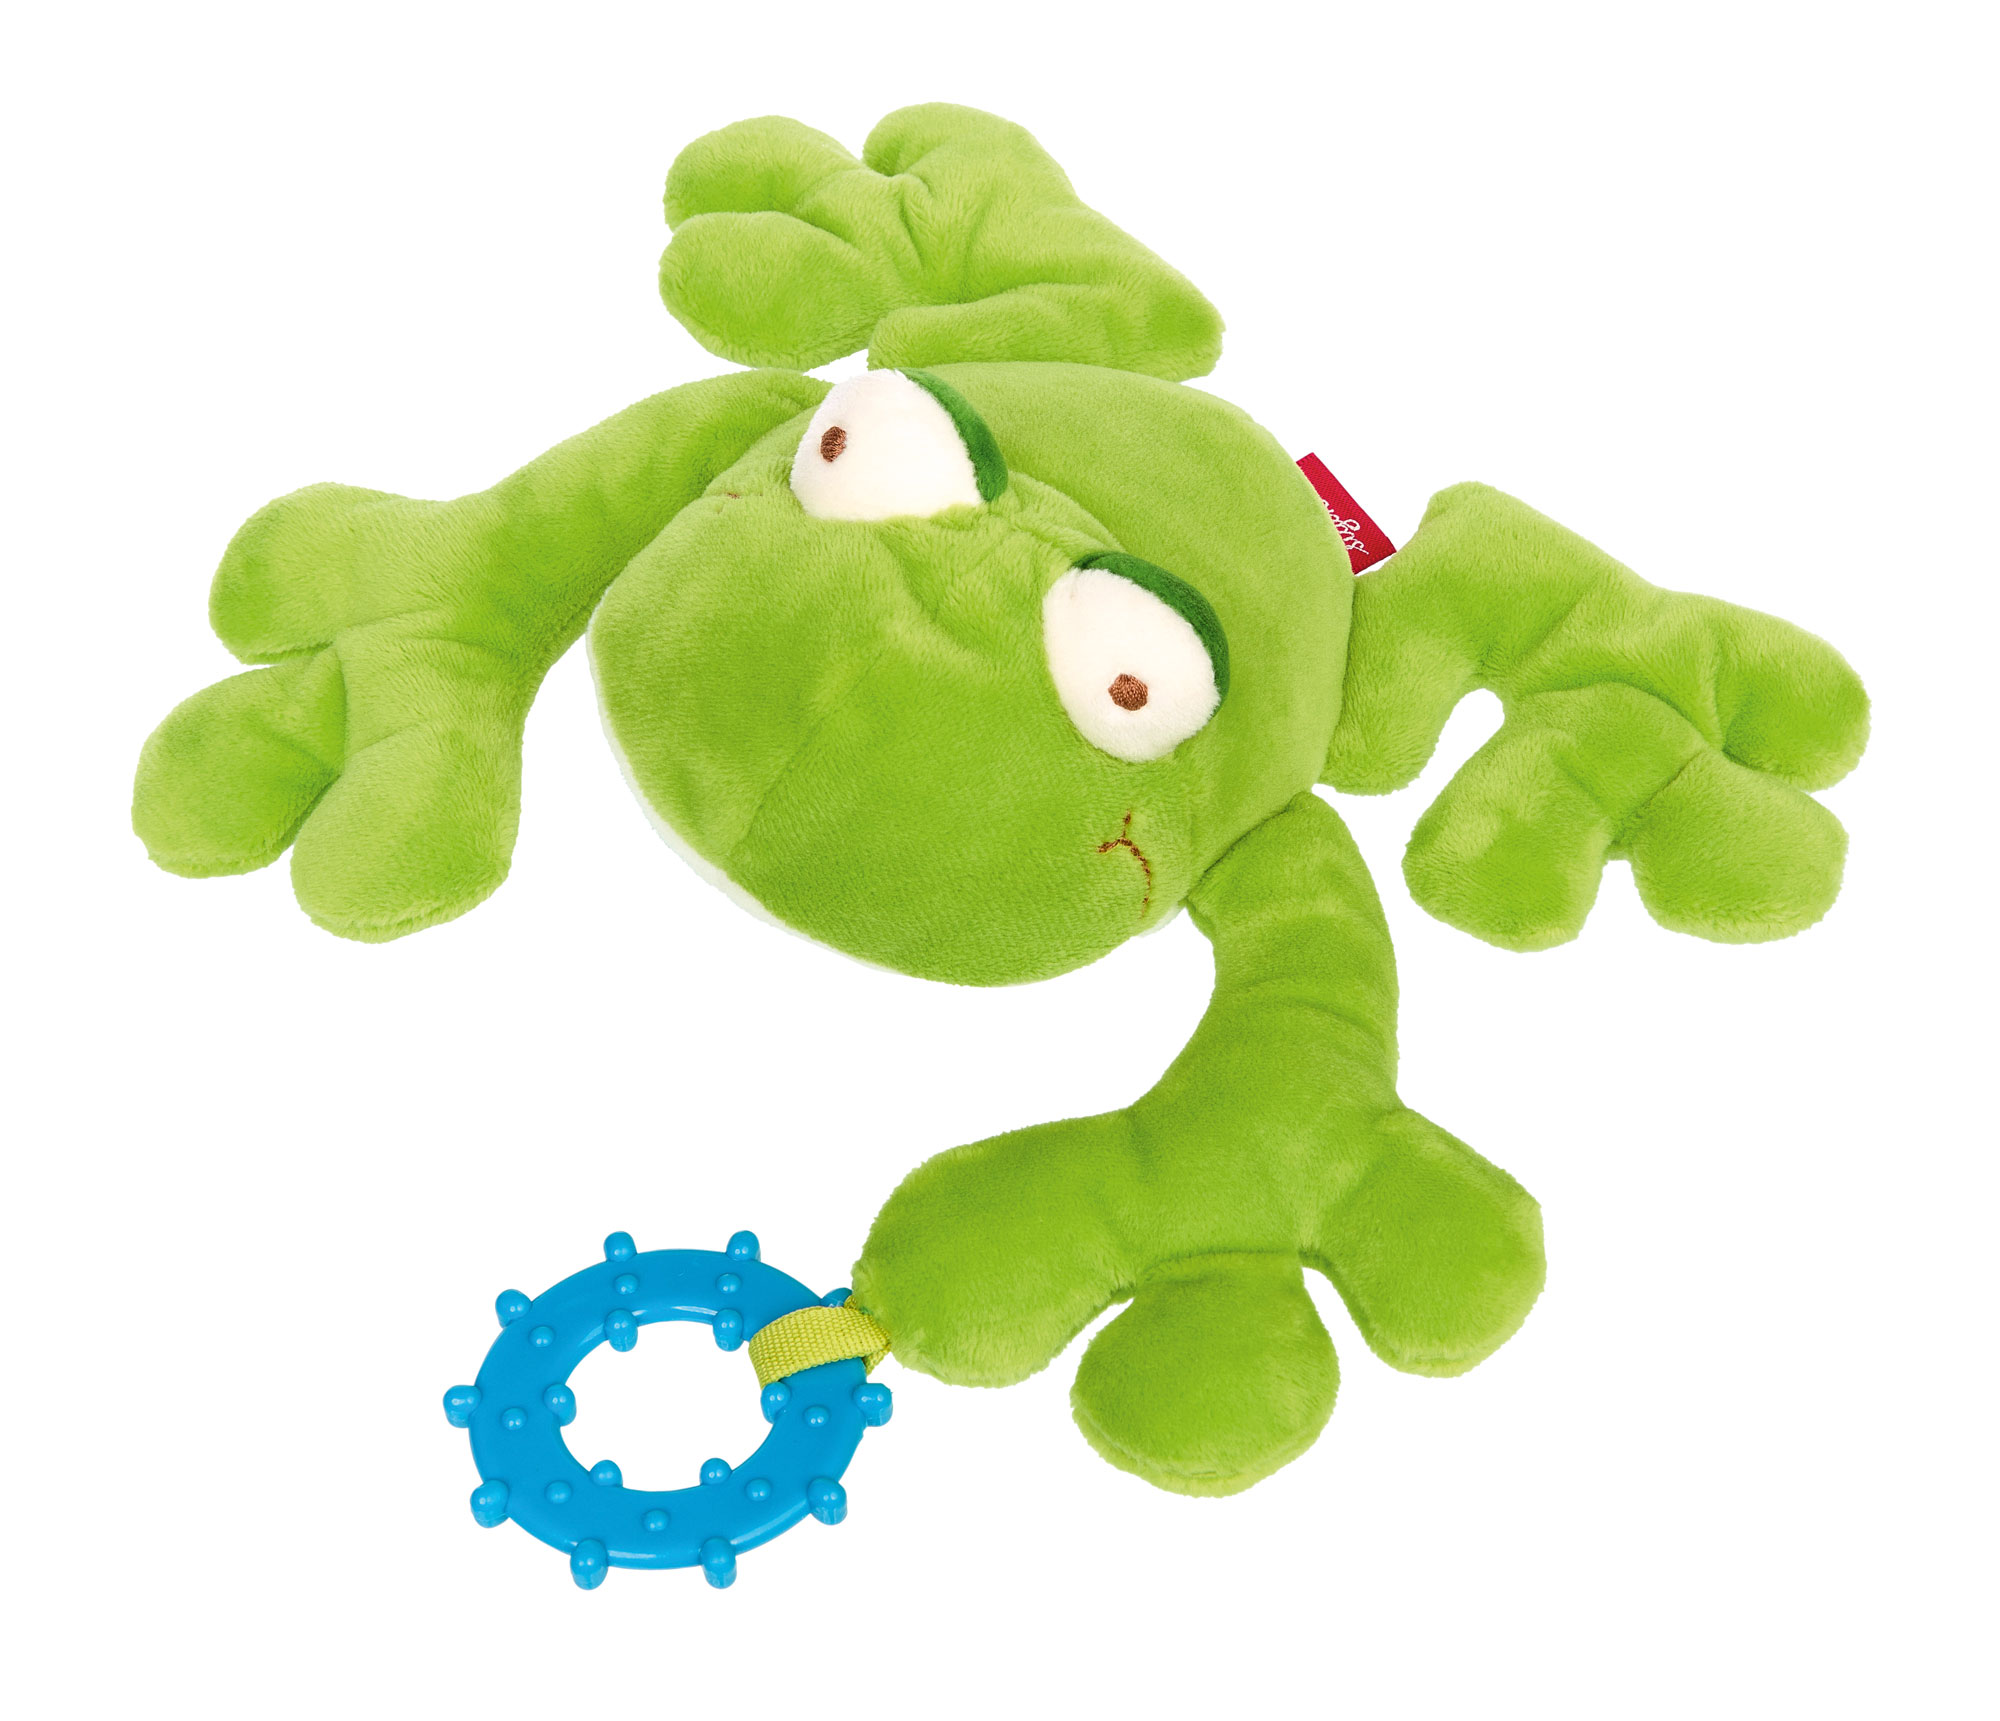 Baby chime soft toy frog with teether